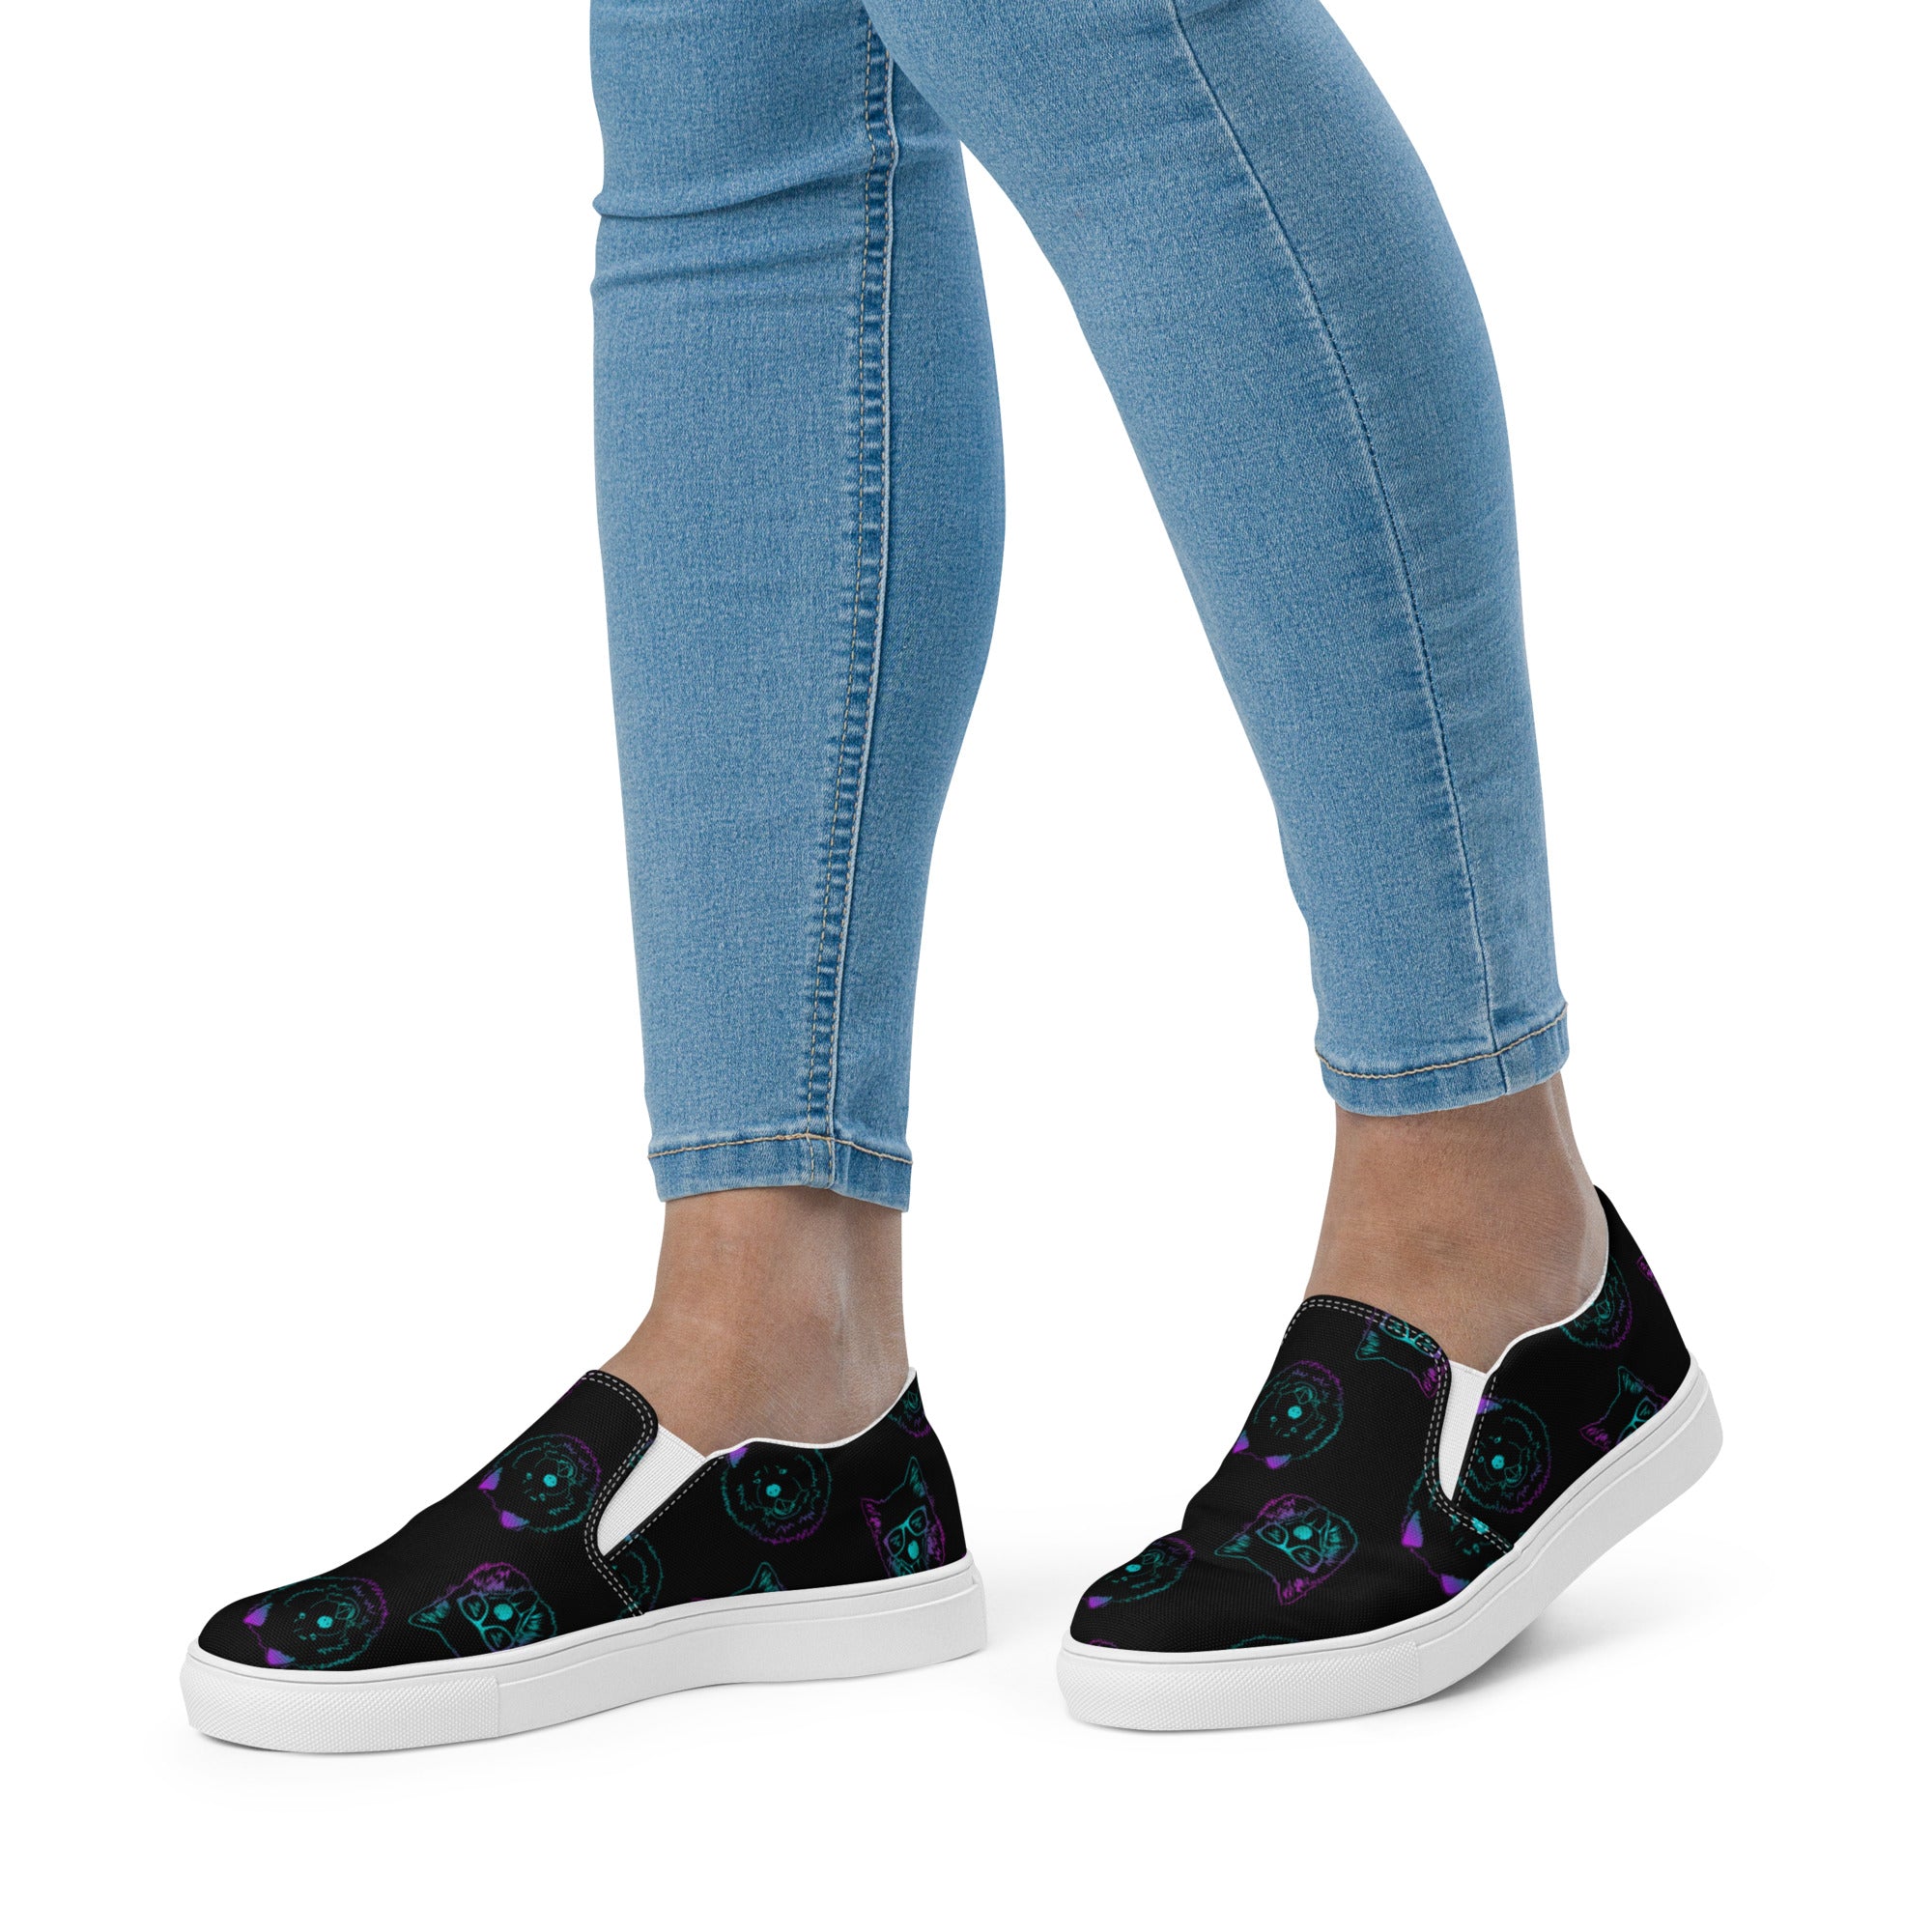 Boo & Chimmie Revolution Women’s slip-on canvas shoes